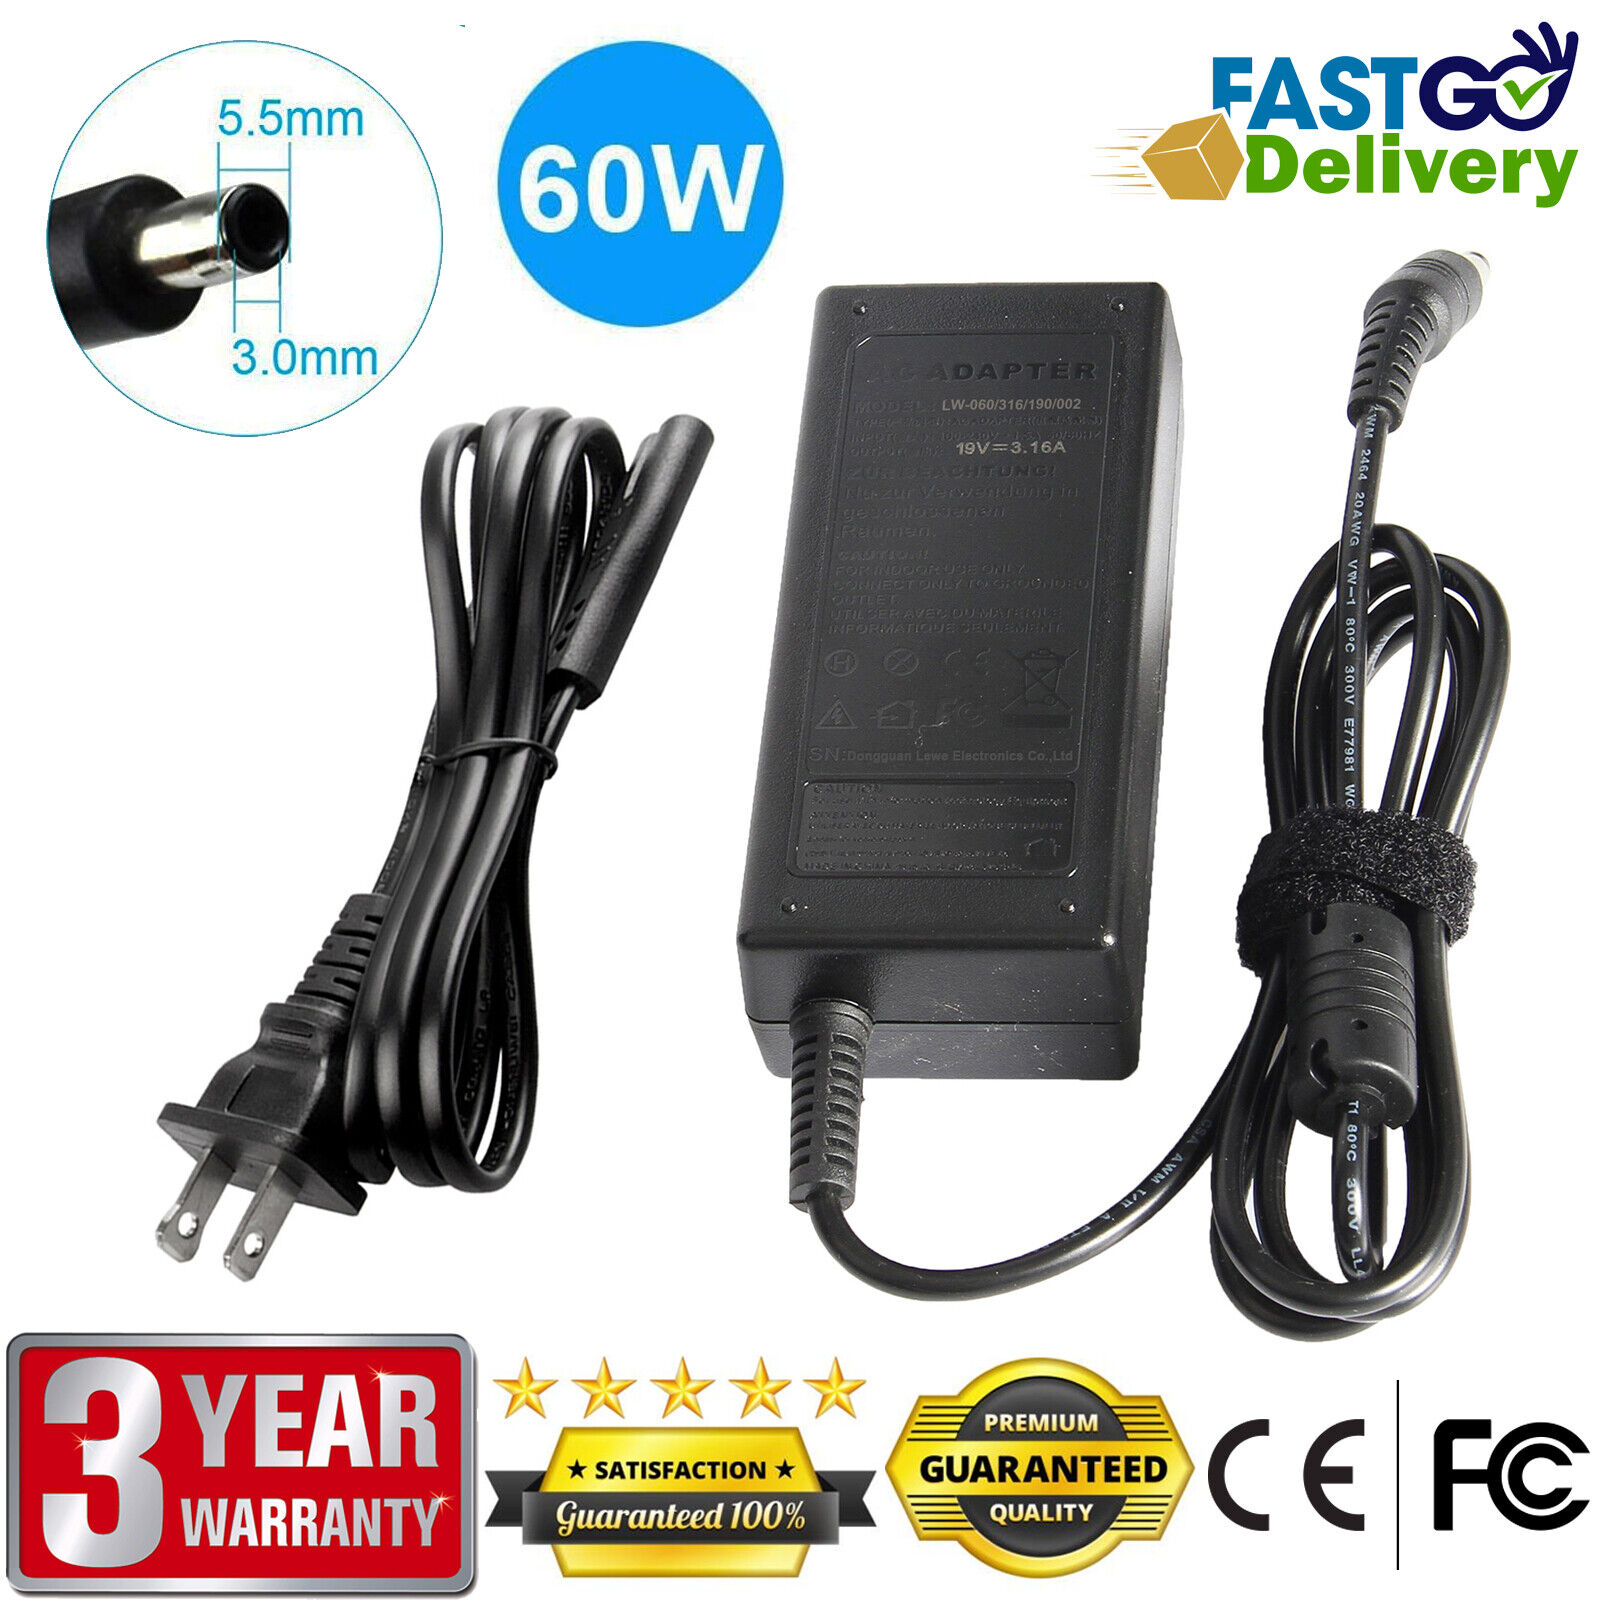 19V 3.15A 60W AC Power Laptop Charger Adapter For Samsung CPA09-004A AD-6019R